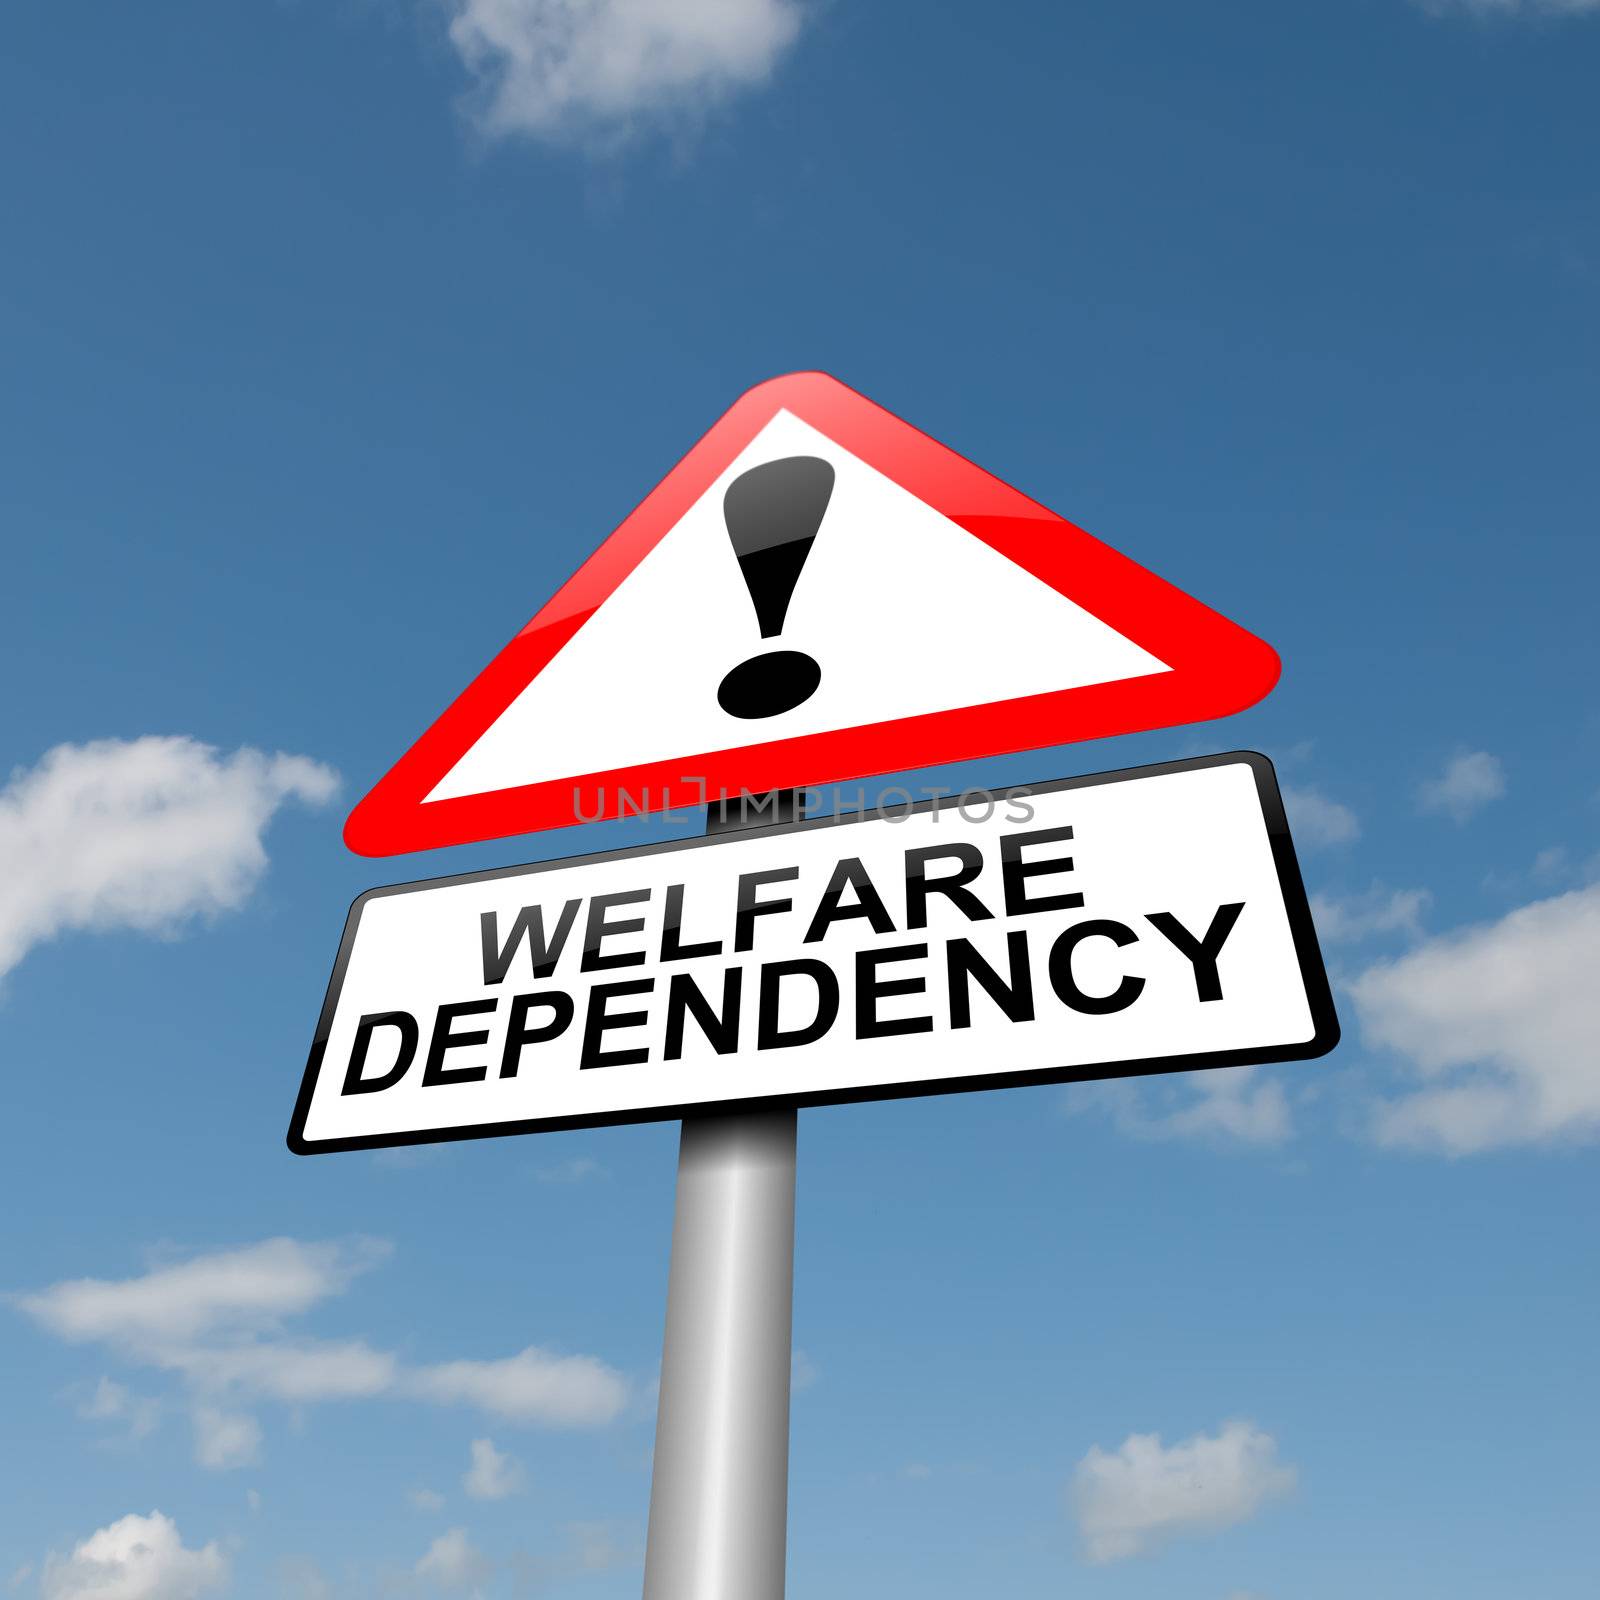 Welfare dependence. by 72soul